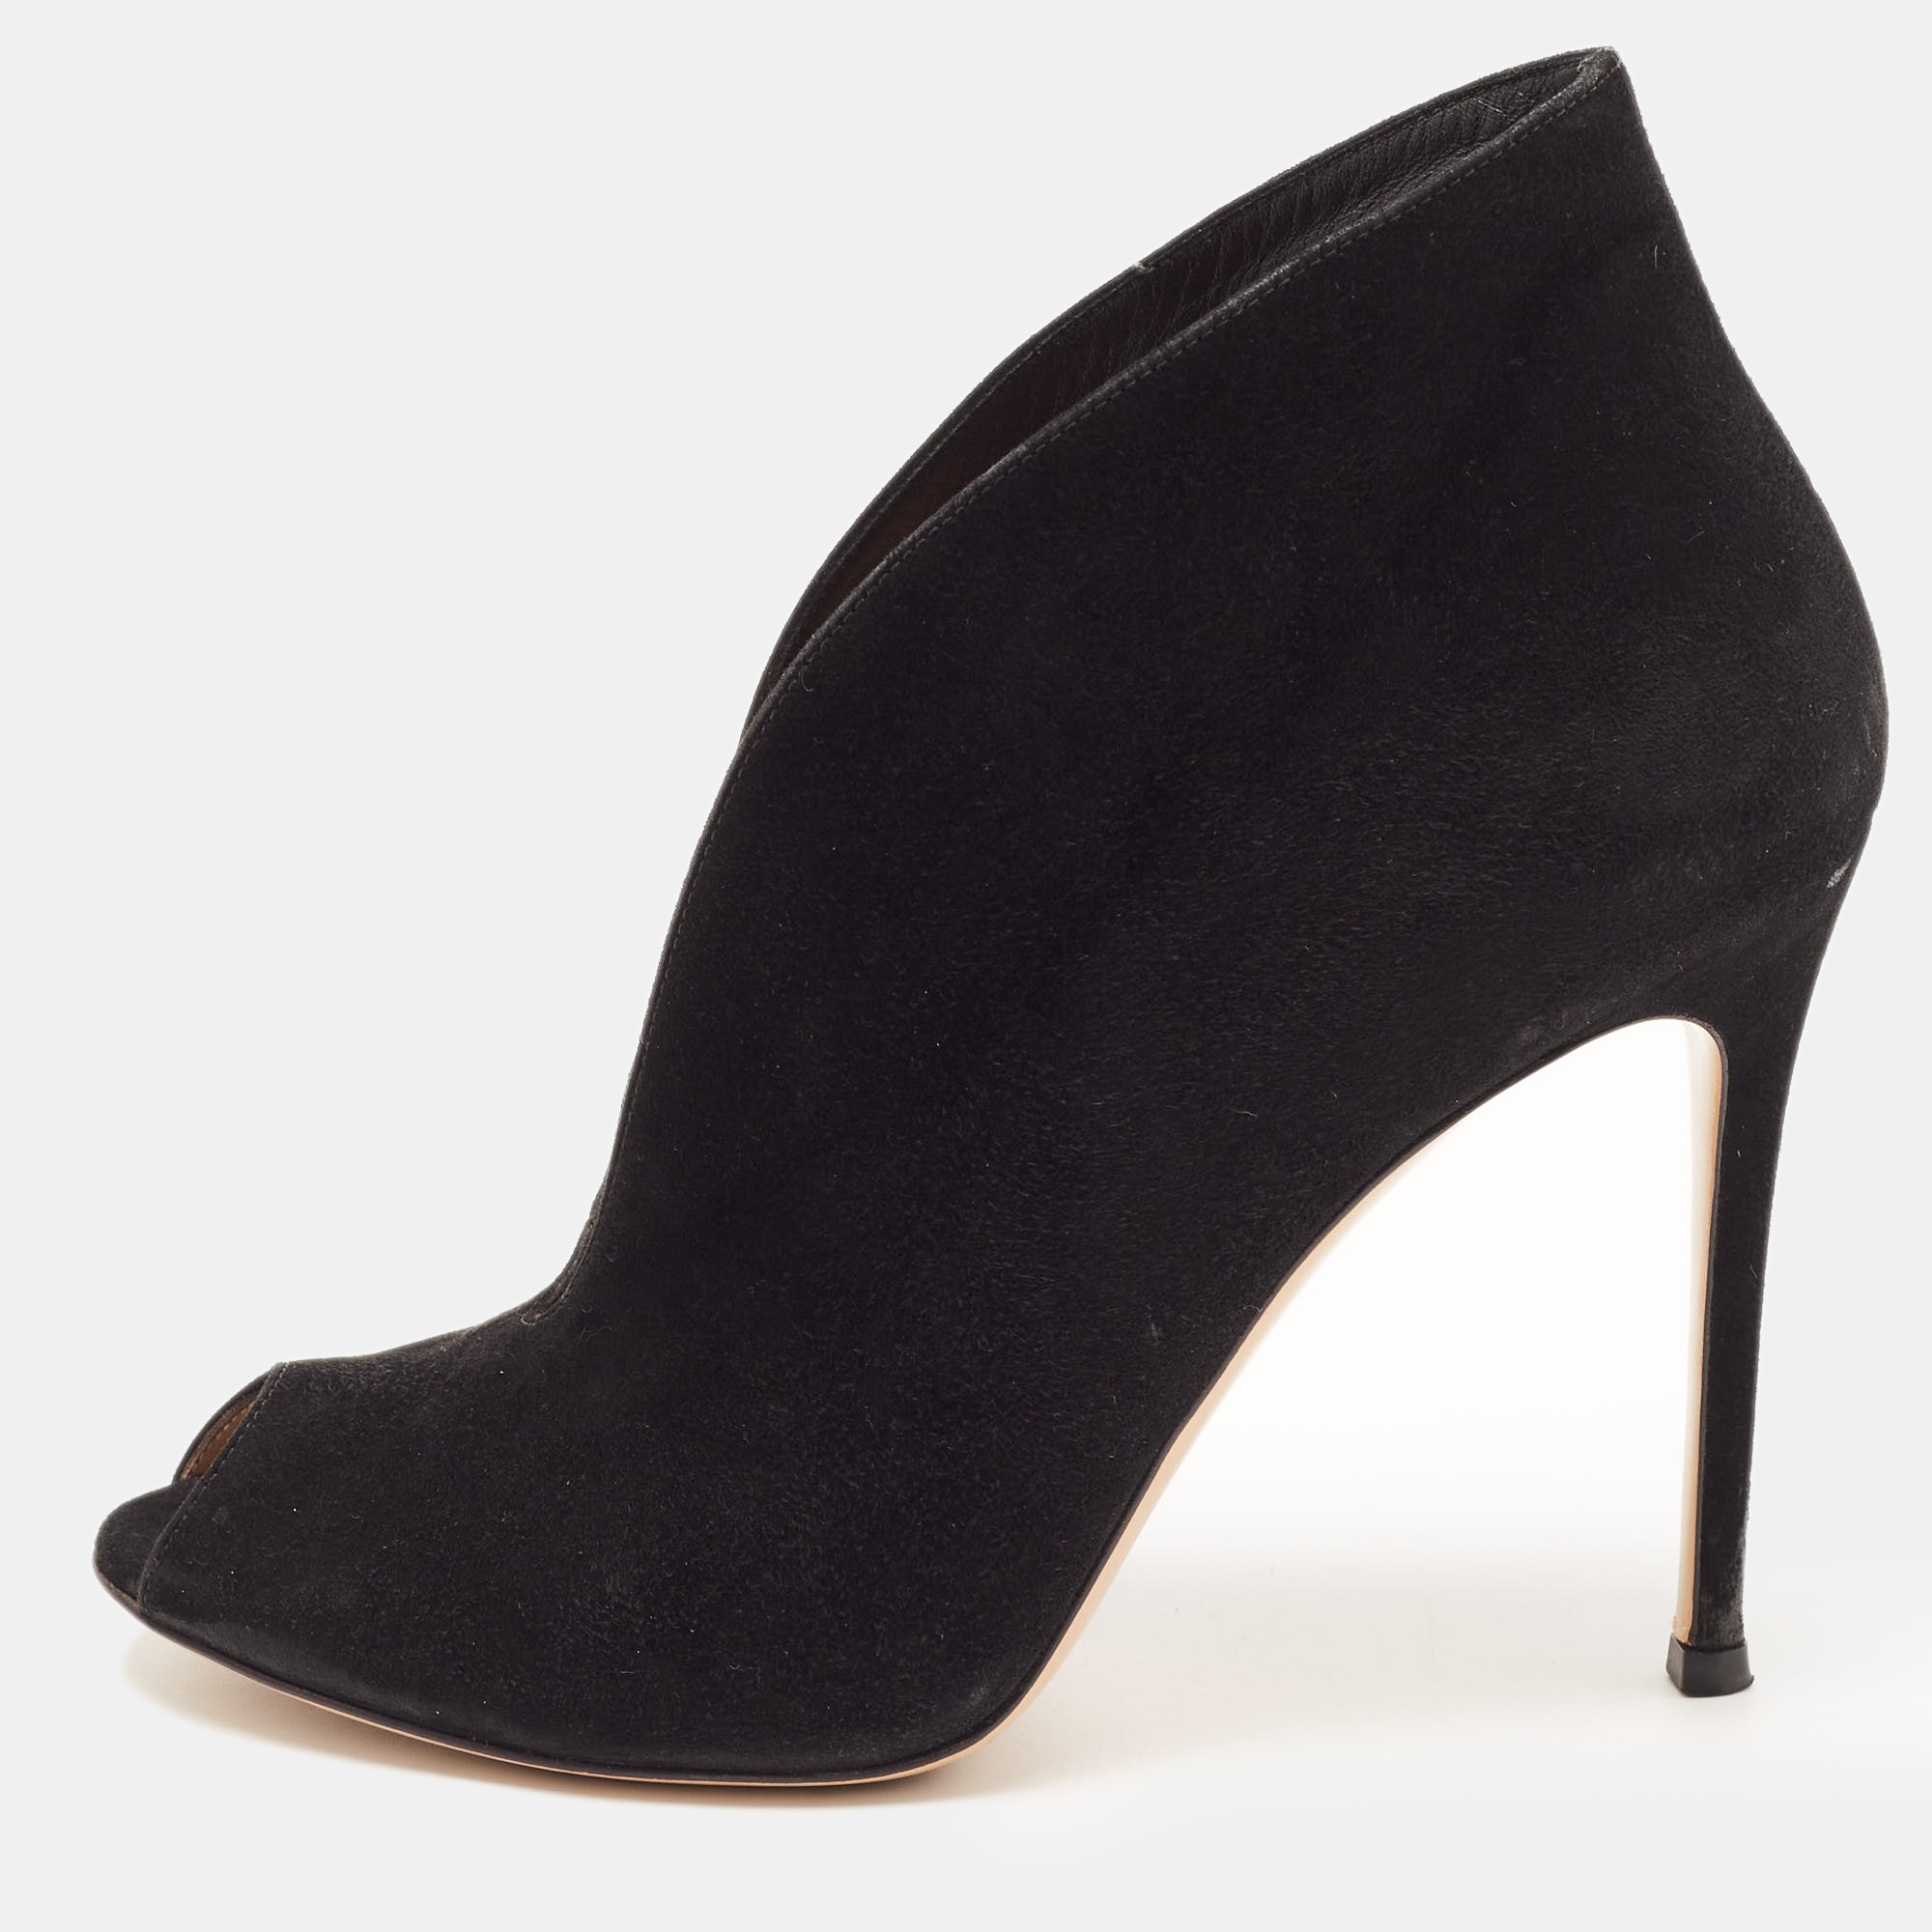 Pre-owned Gianvito Rossi Black Suede Vamp Peep Toe Ankle Booties Size 39